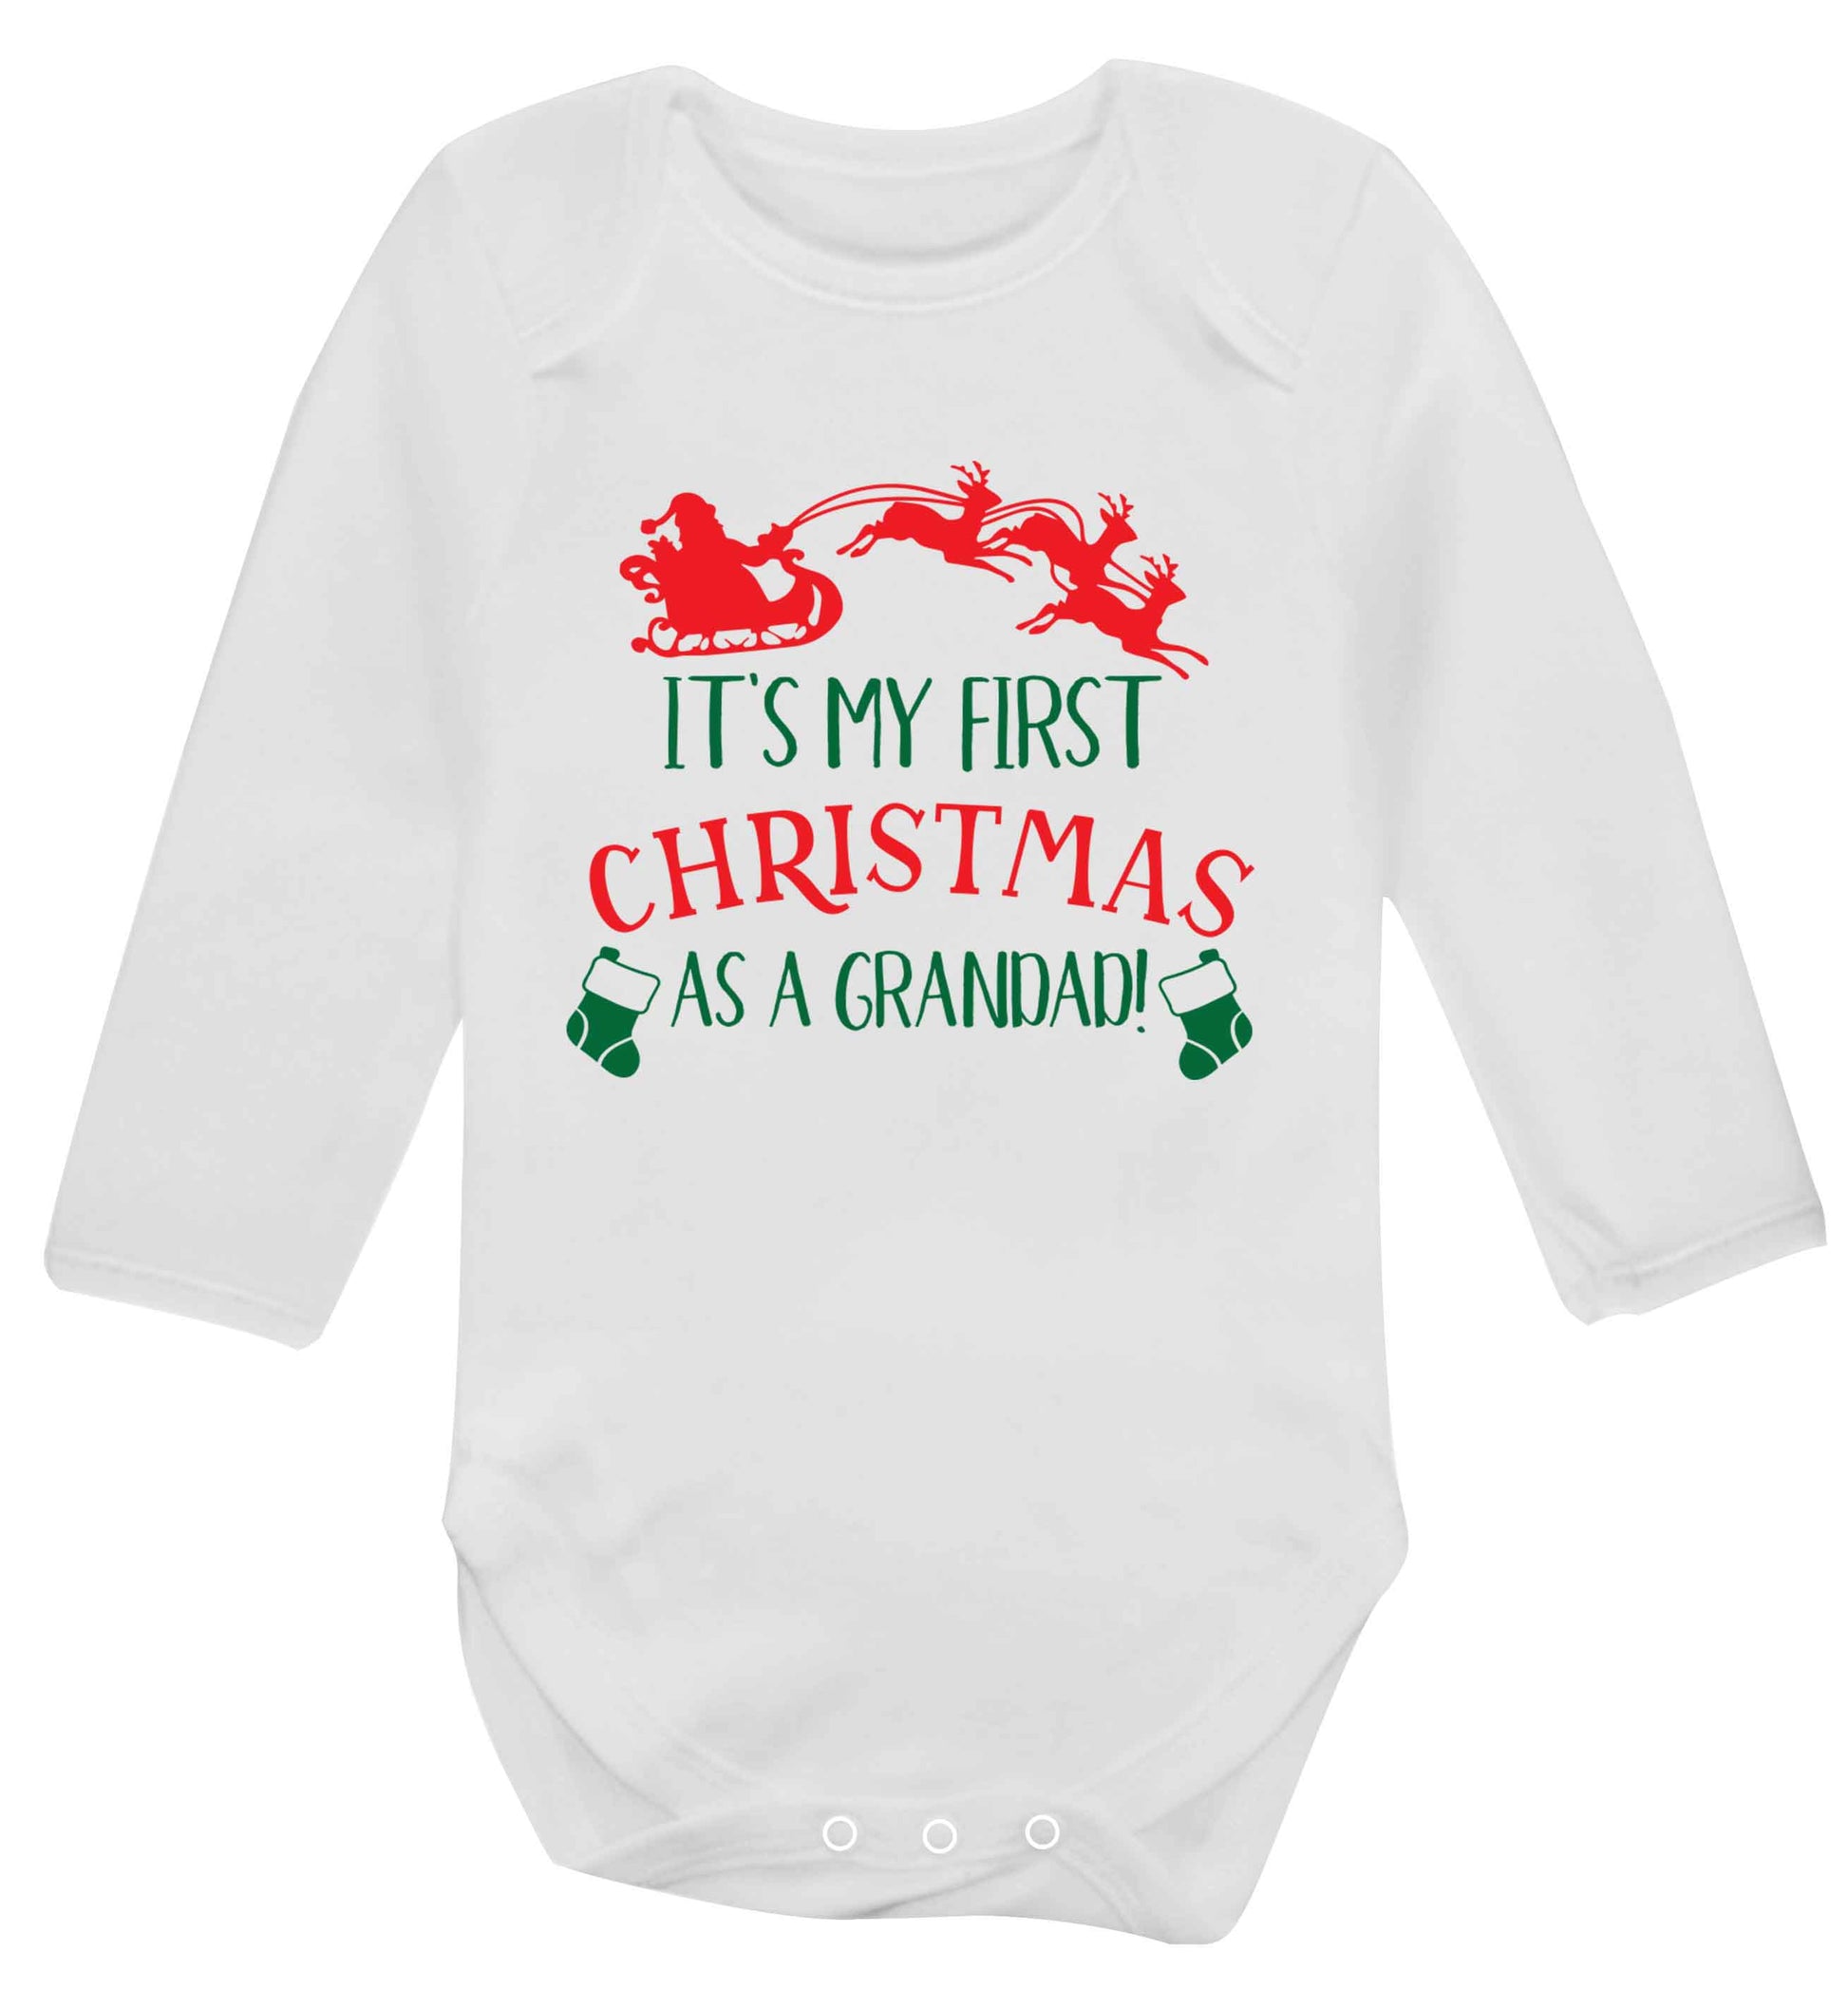 It's my first Christmas as a grandad! Baby Vest long sleeved white 6-12 months